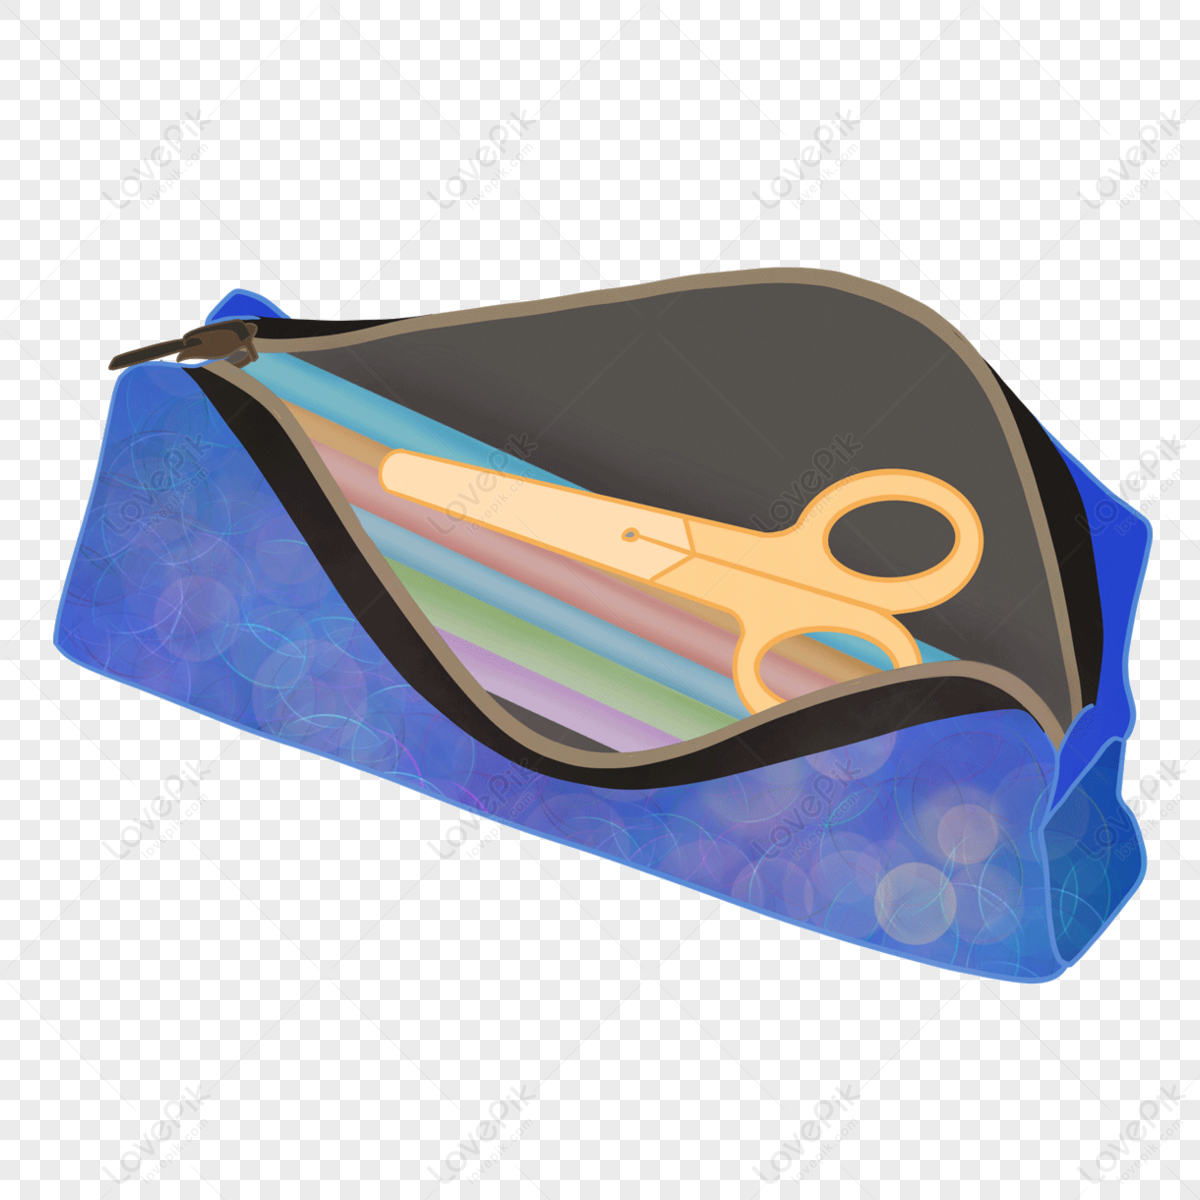 Student studying pencil case pencil case clipart,scissors tool,students studying png image